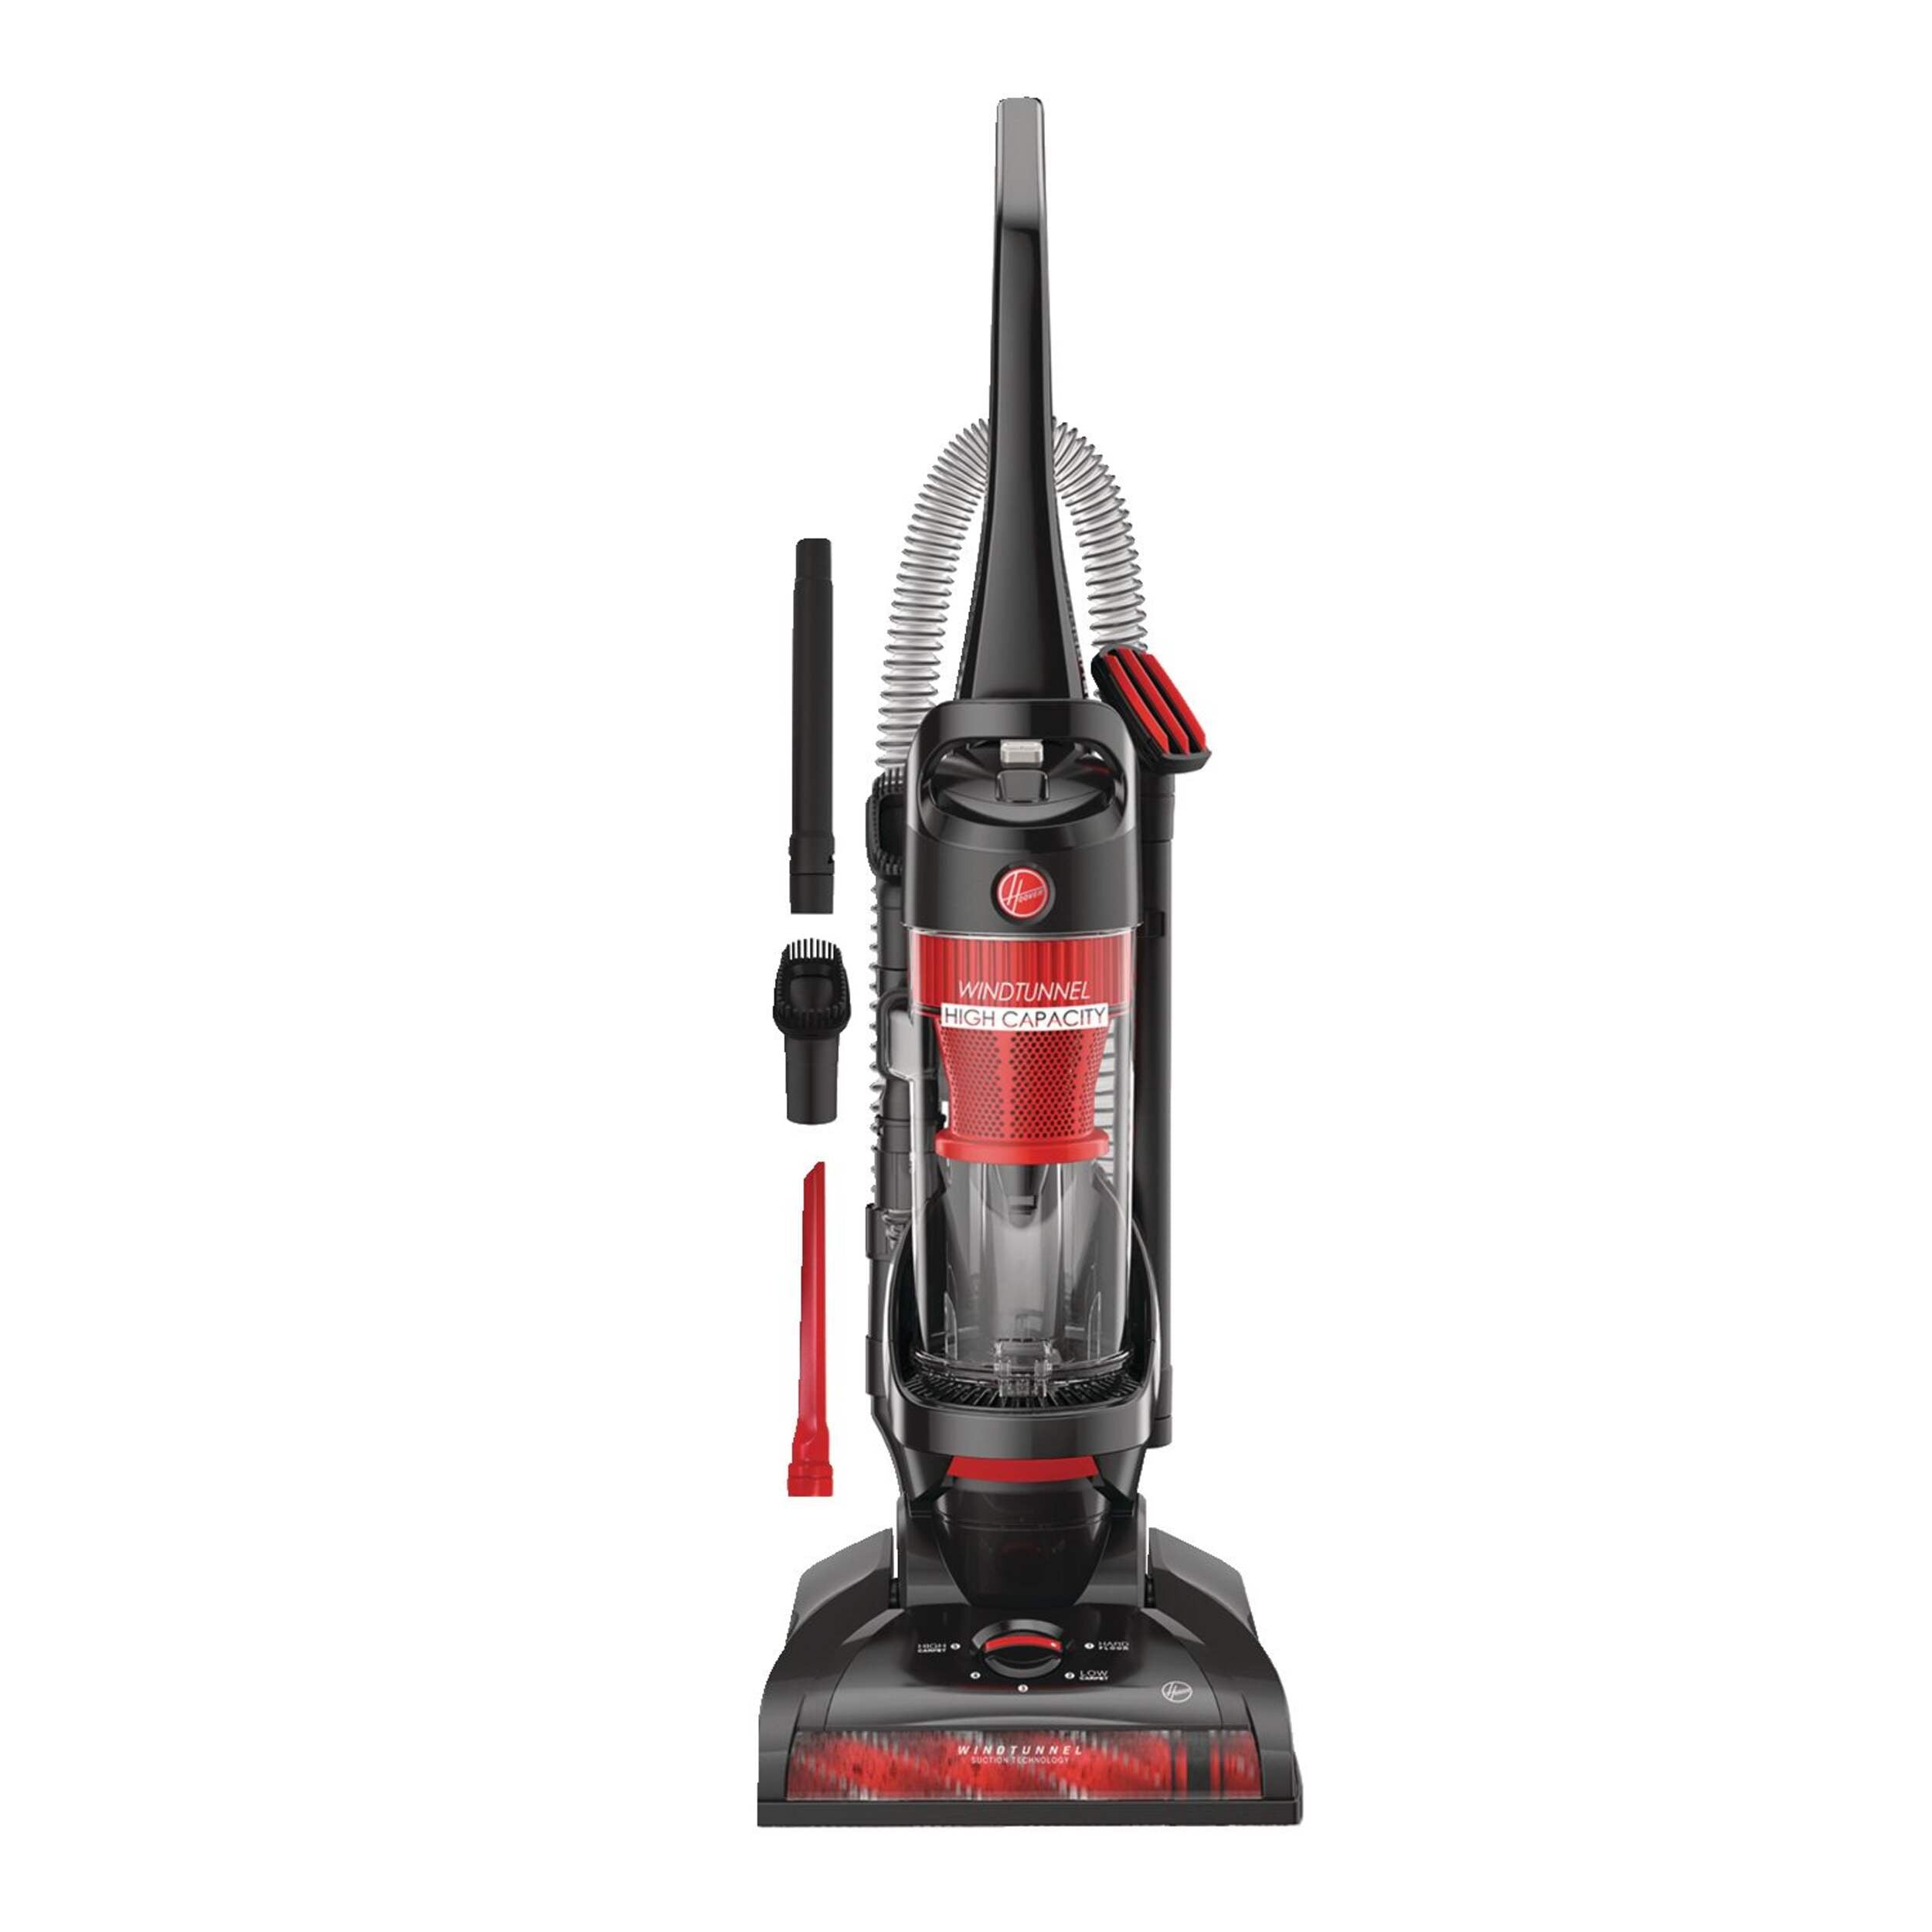 Hoover UH71104 WindTunnel® 2 High Capacity Bagless Upright Vacuum Cleaner (Refurbished, 90 Days Warranty)